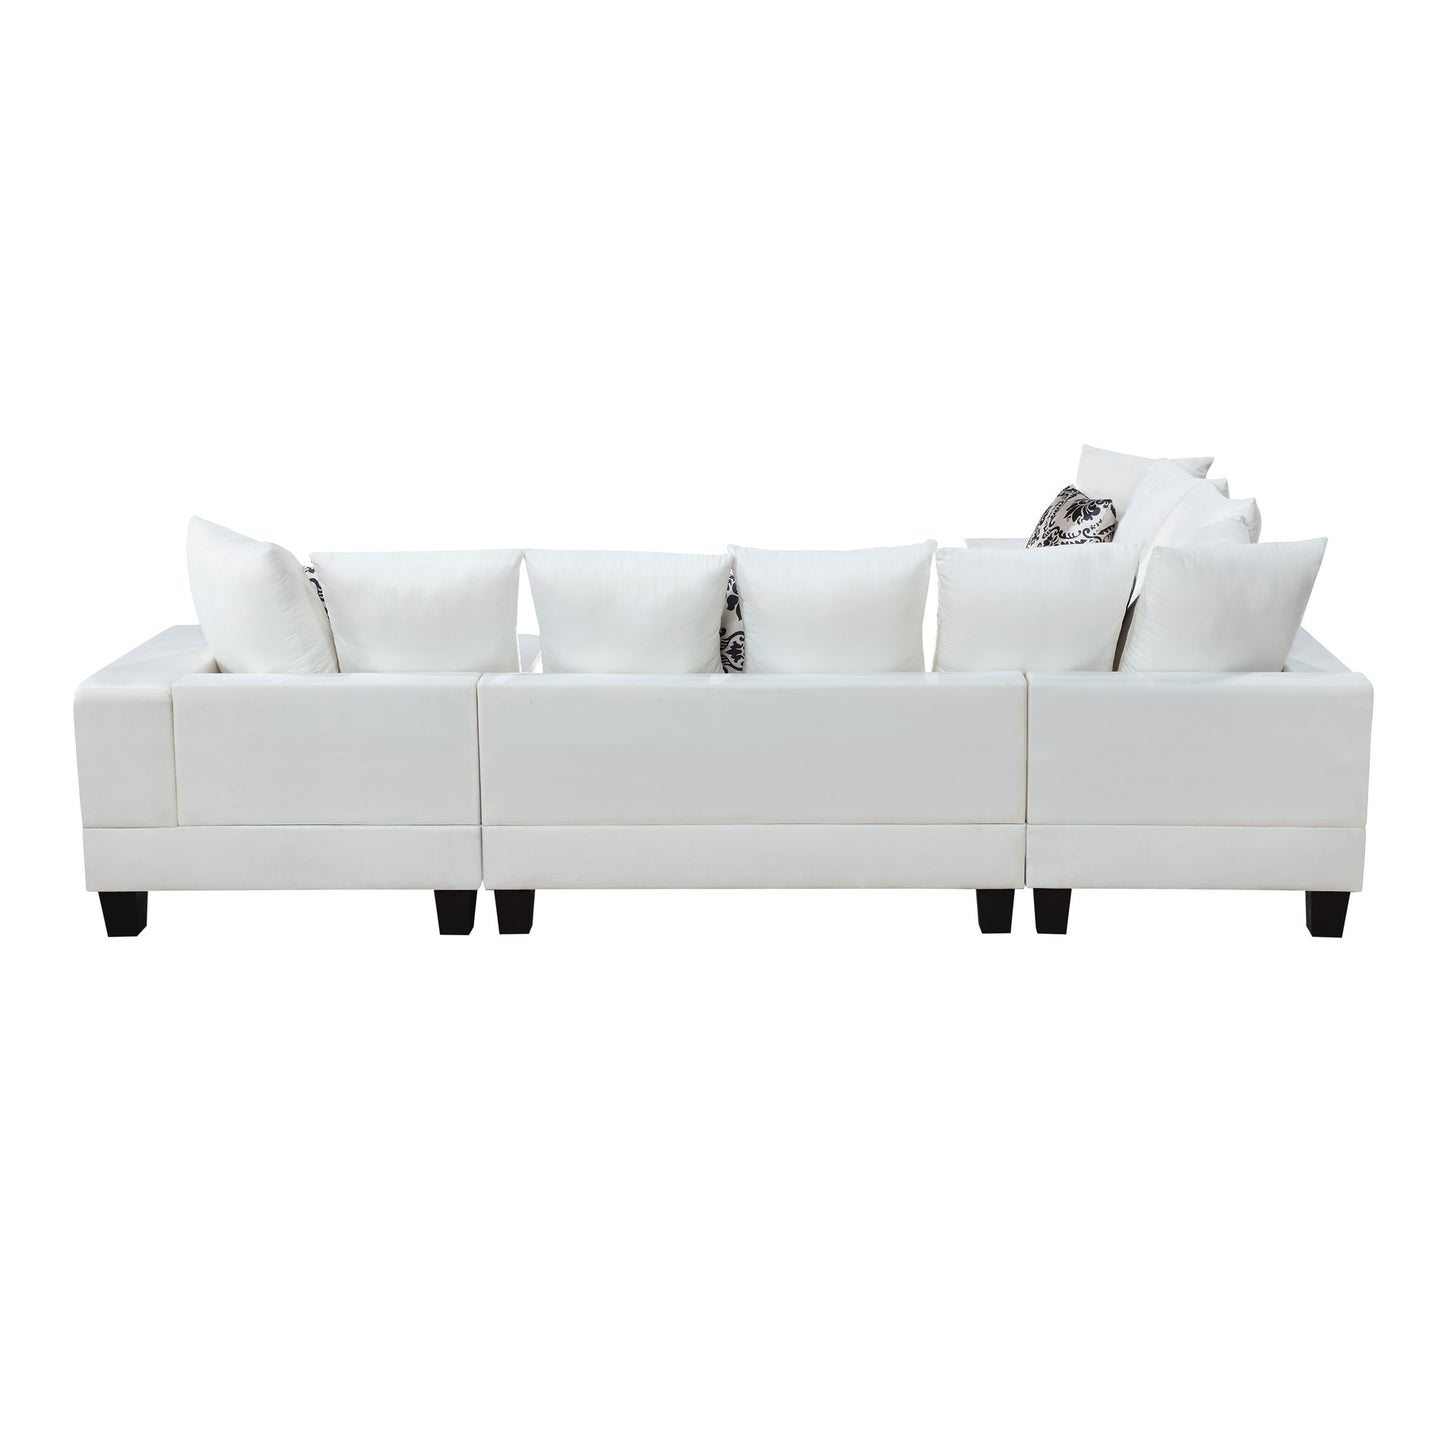 U-Shape Sectional, Corner Couch, Pillows